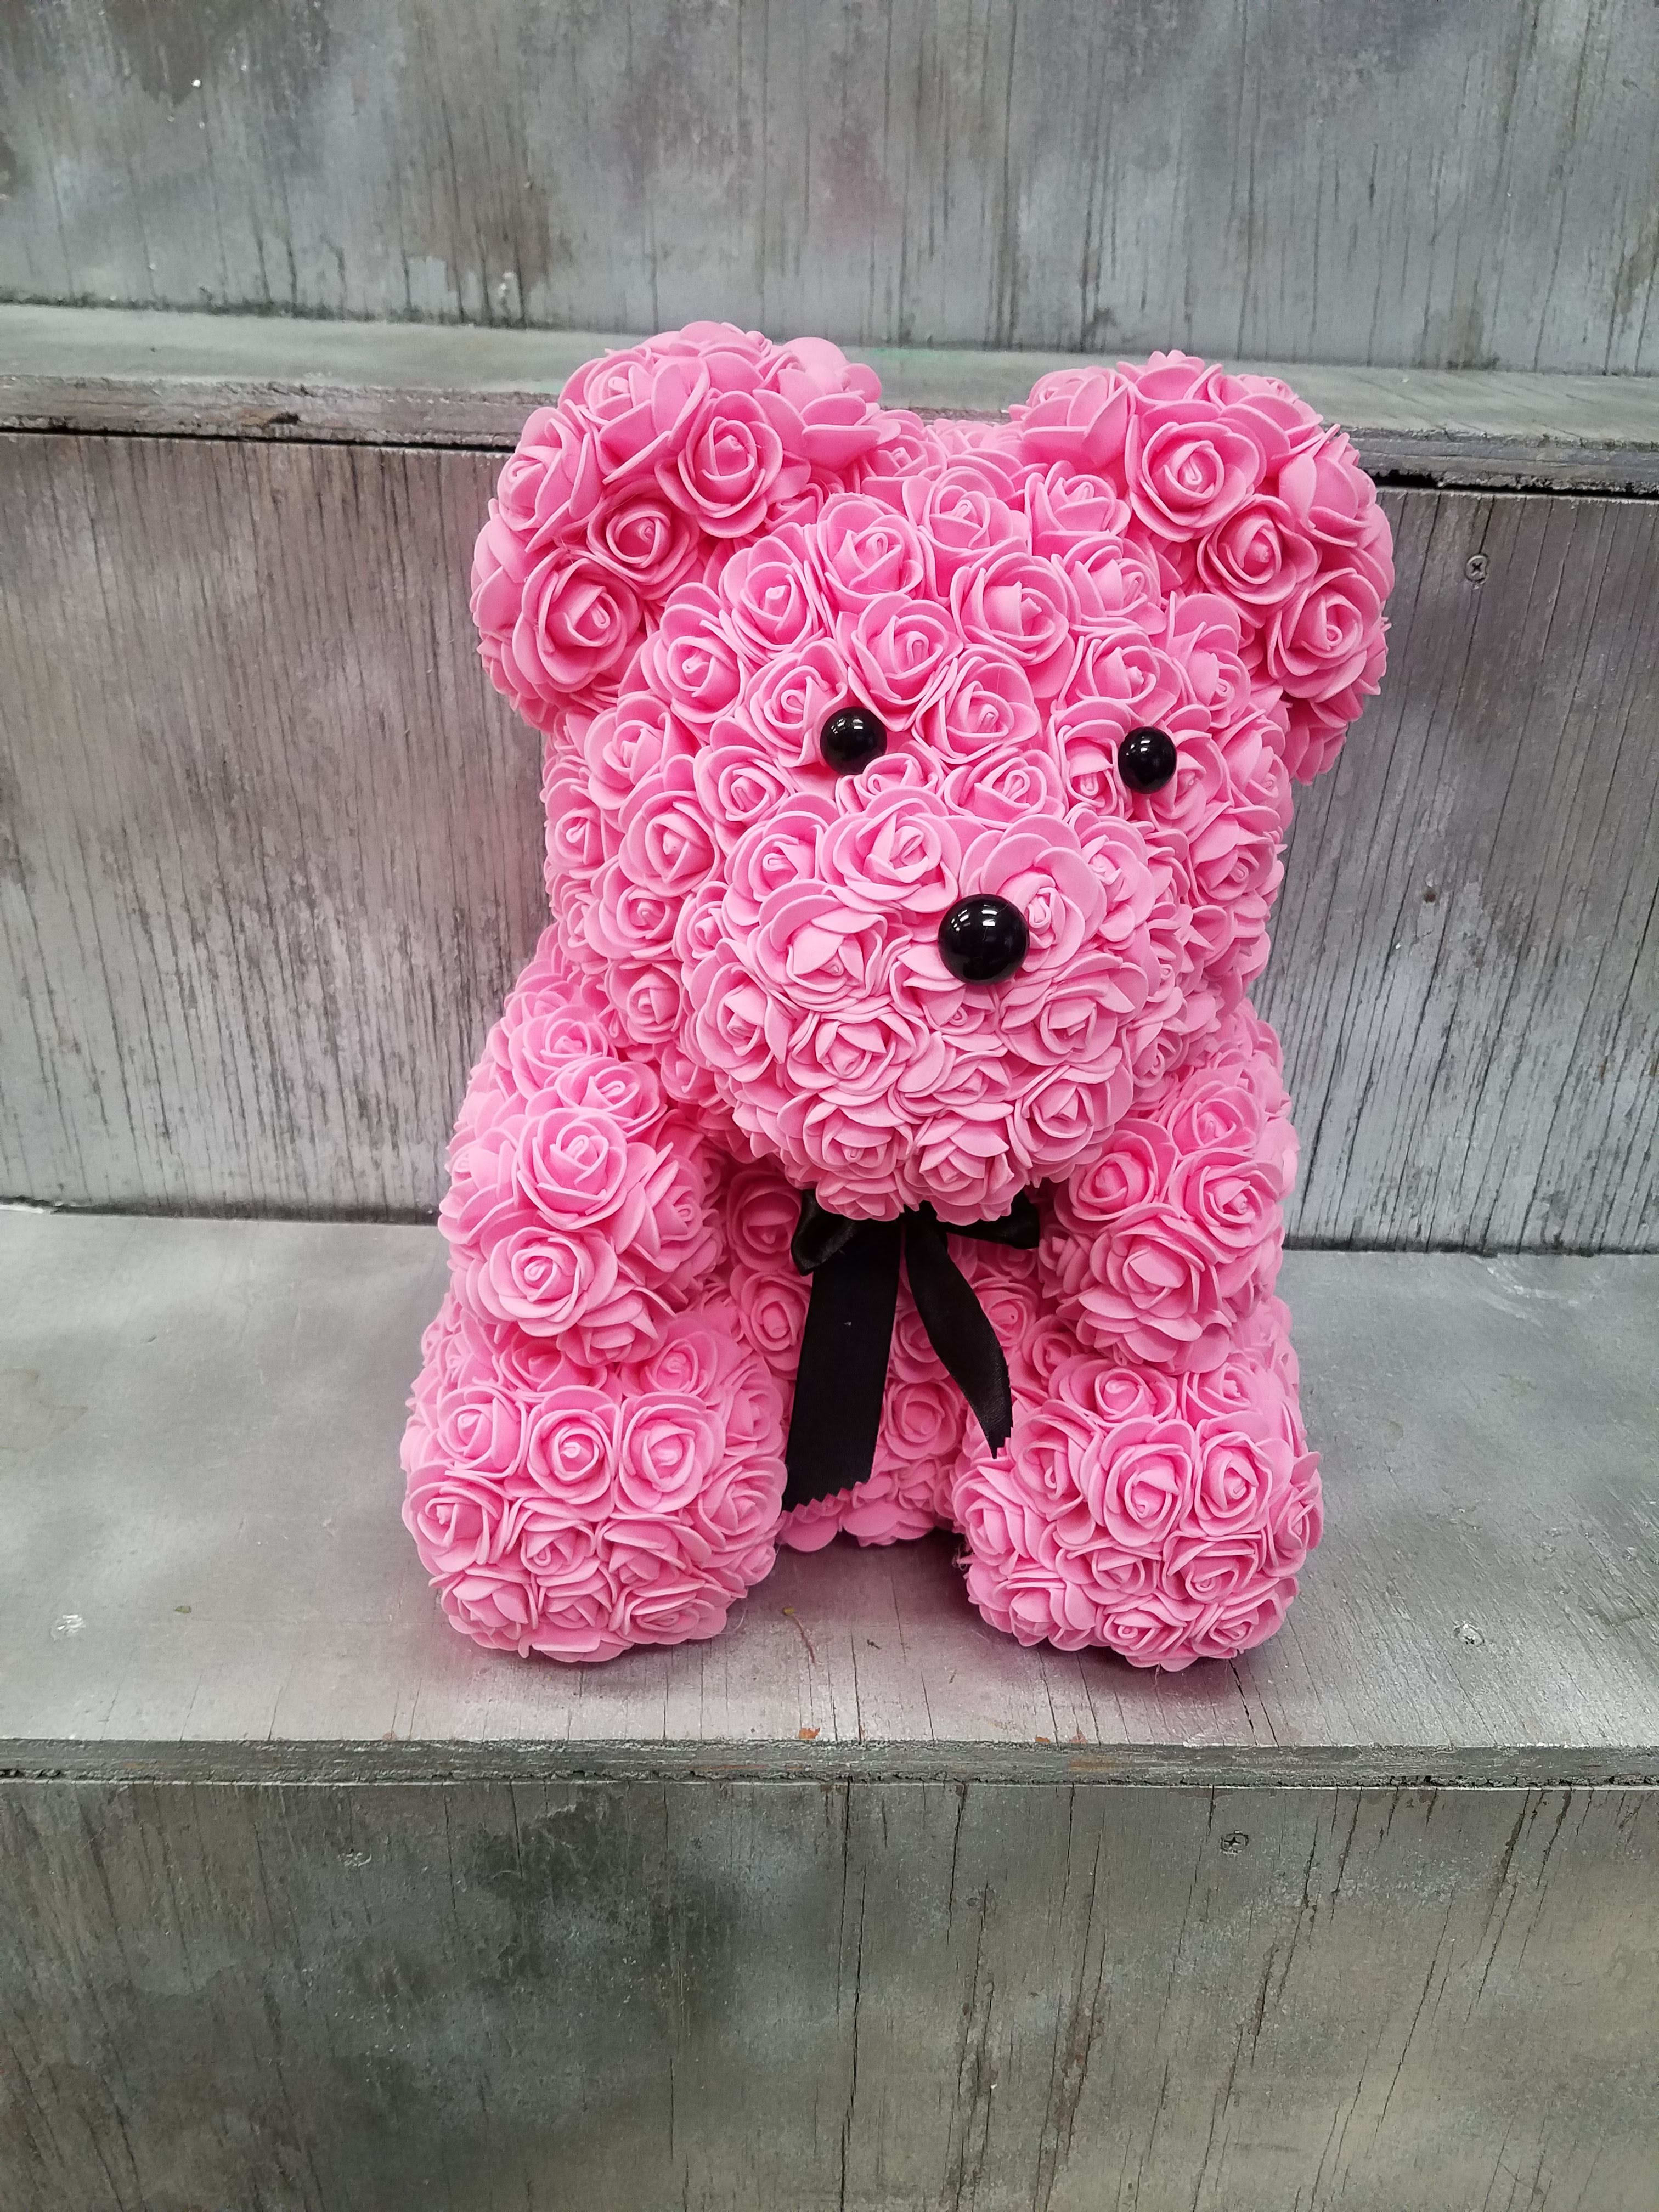 teddy bear made from roses